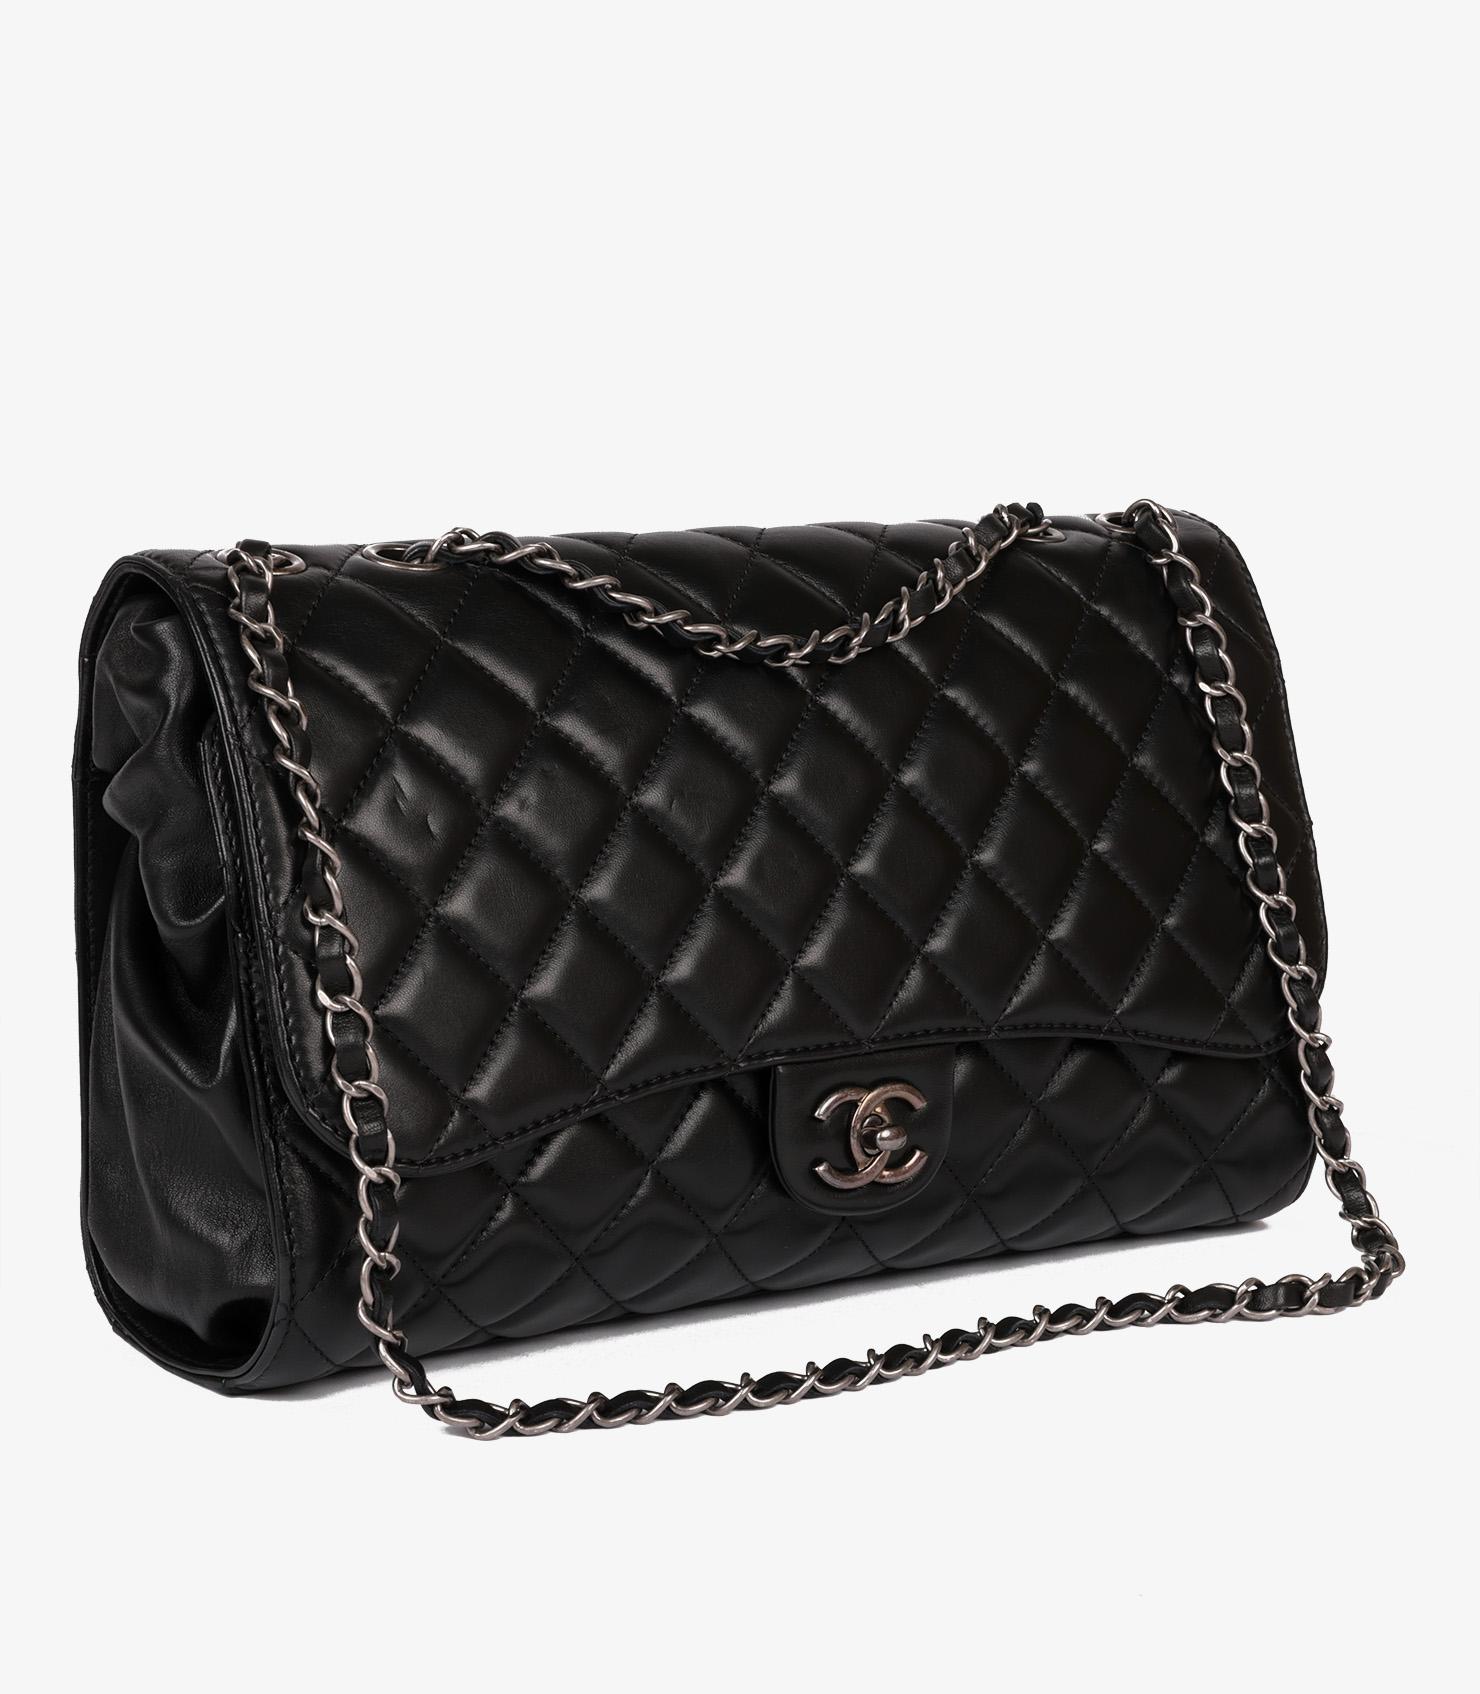 Chanel Black Quilted Lambskin Leather Jumbo Drawstring Classic Single Flap Bag In Excellent Condition For Sale In Bishop's Stortford, Hertfordshire